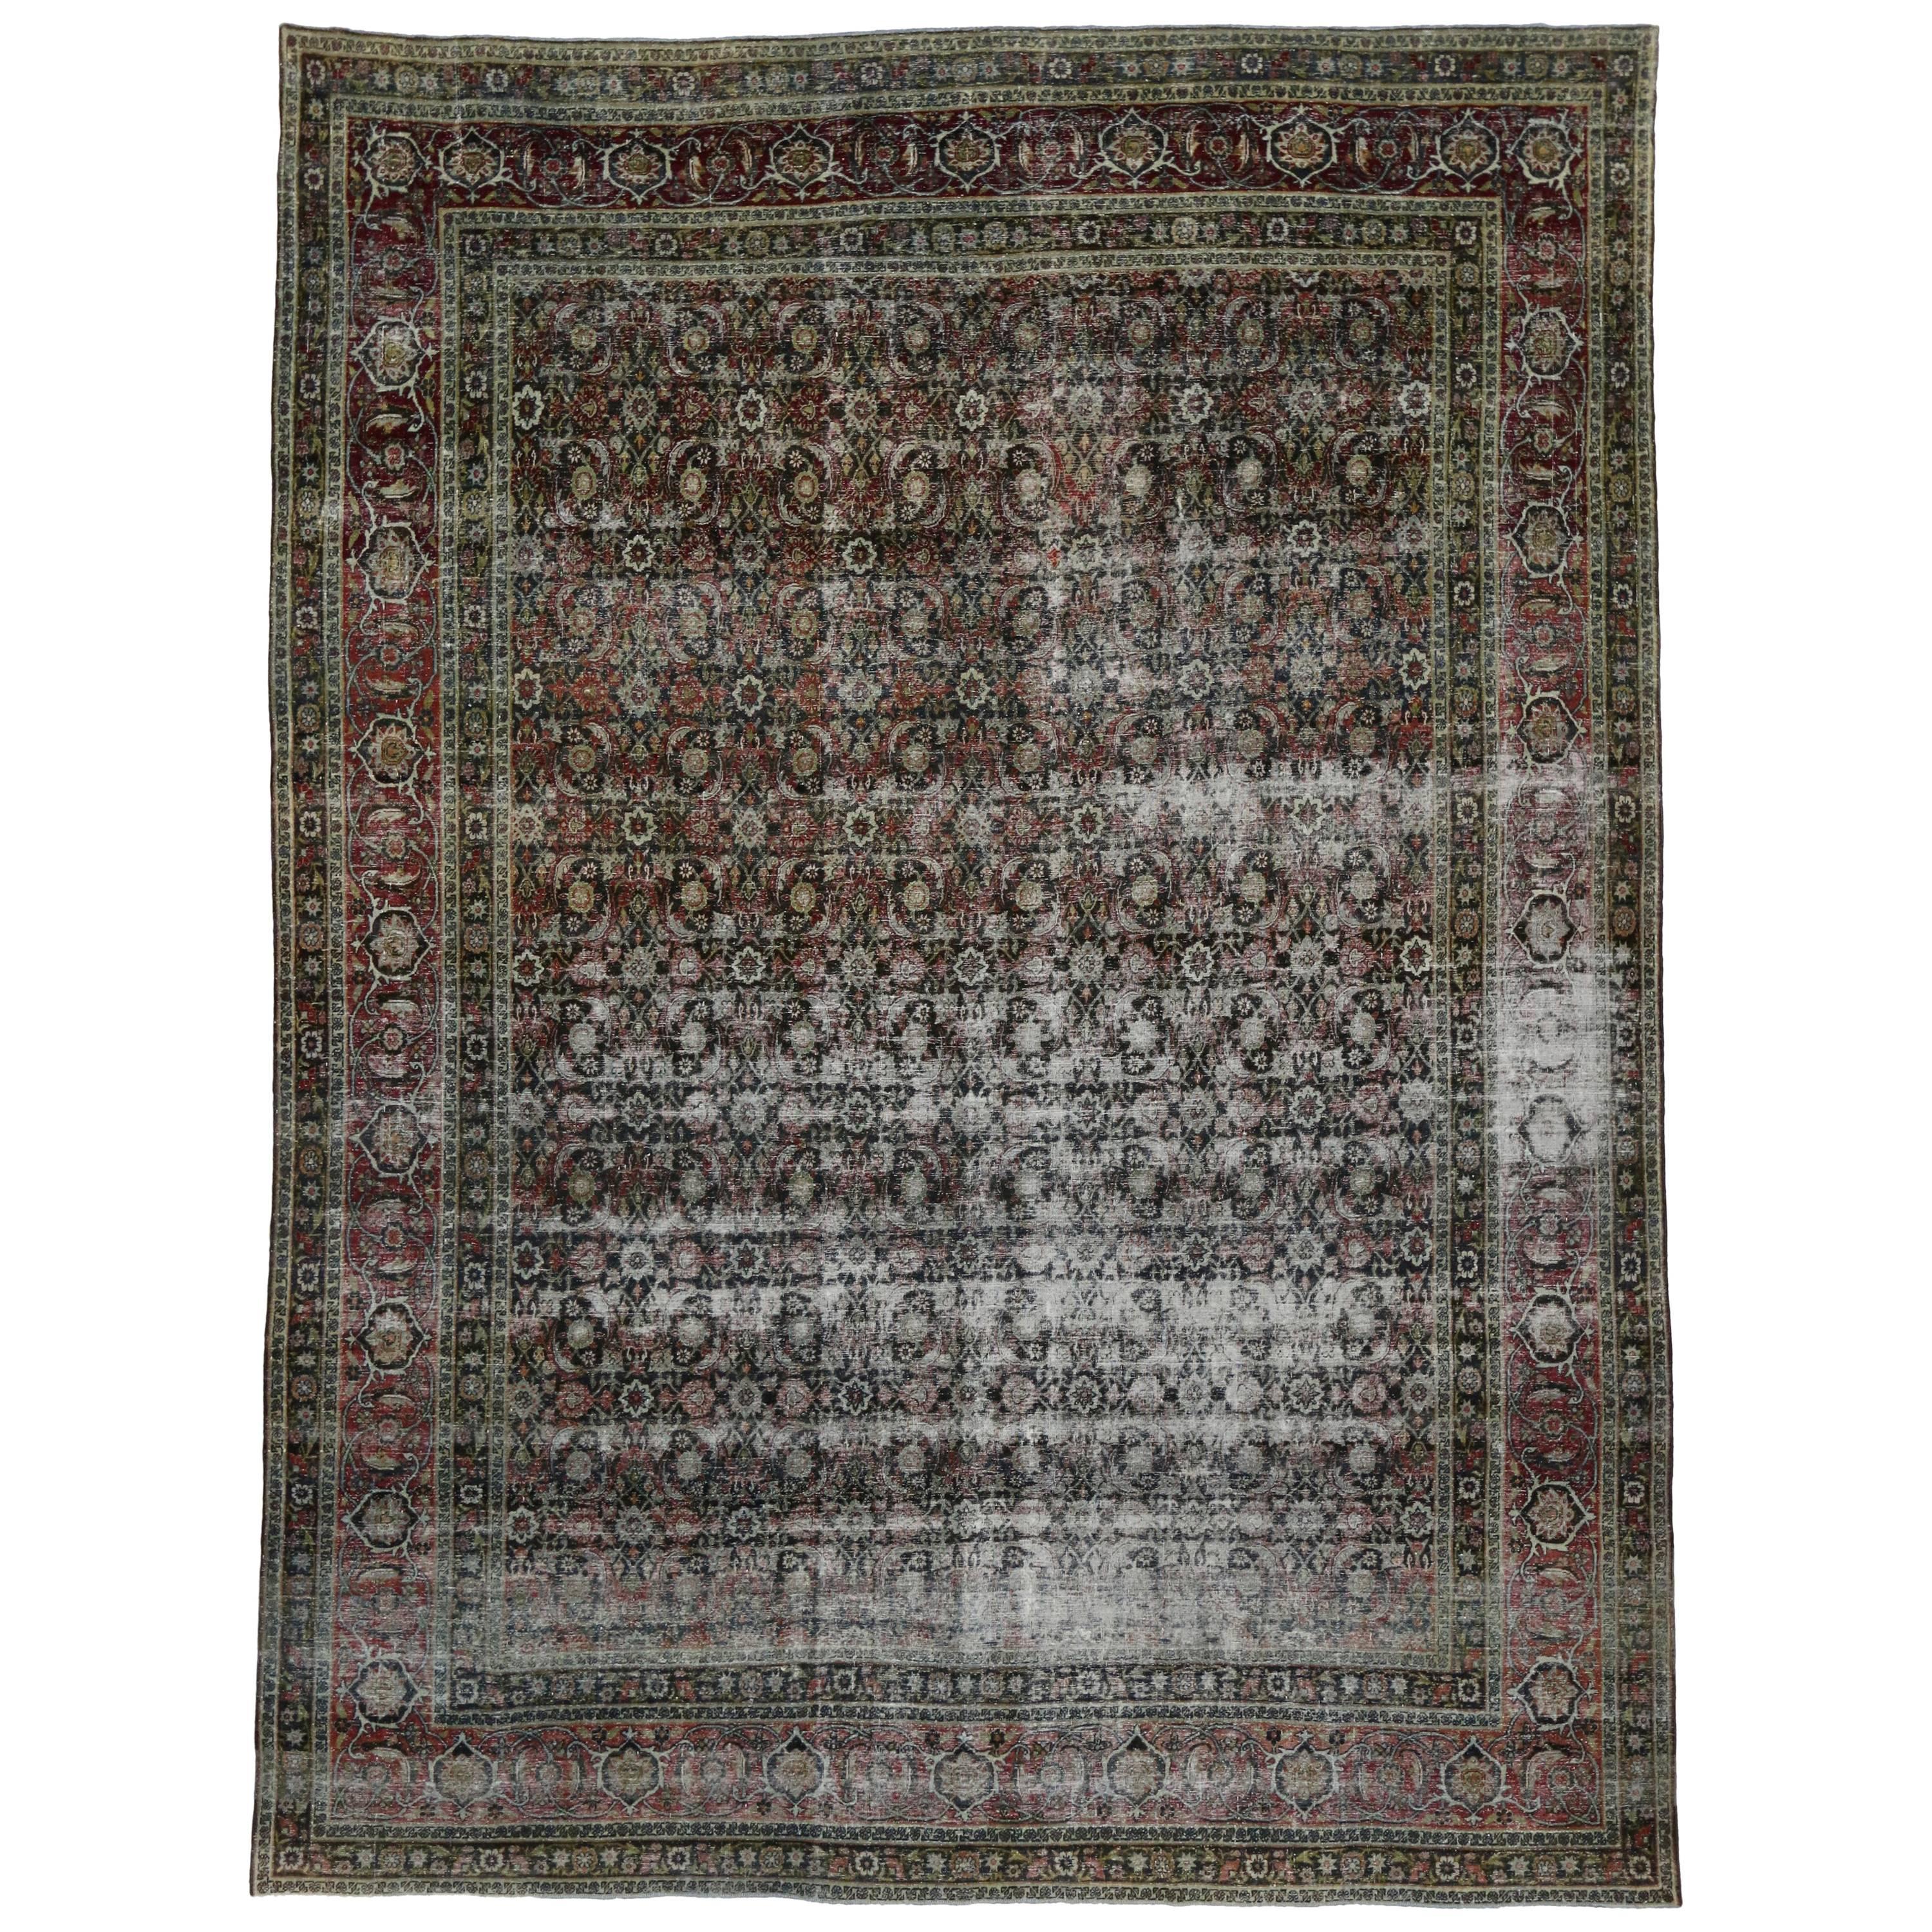 Distressed Antique Yazd Persian Area Rug with Modern Industrial Luxe Style